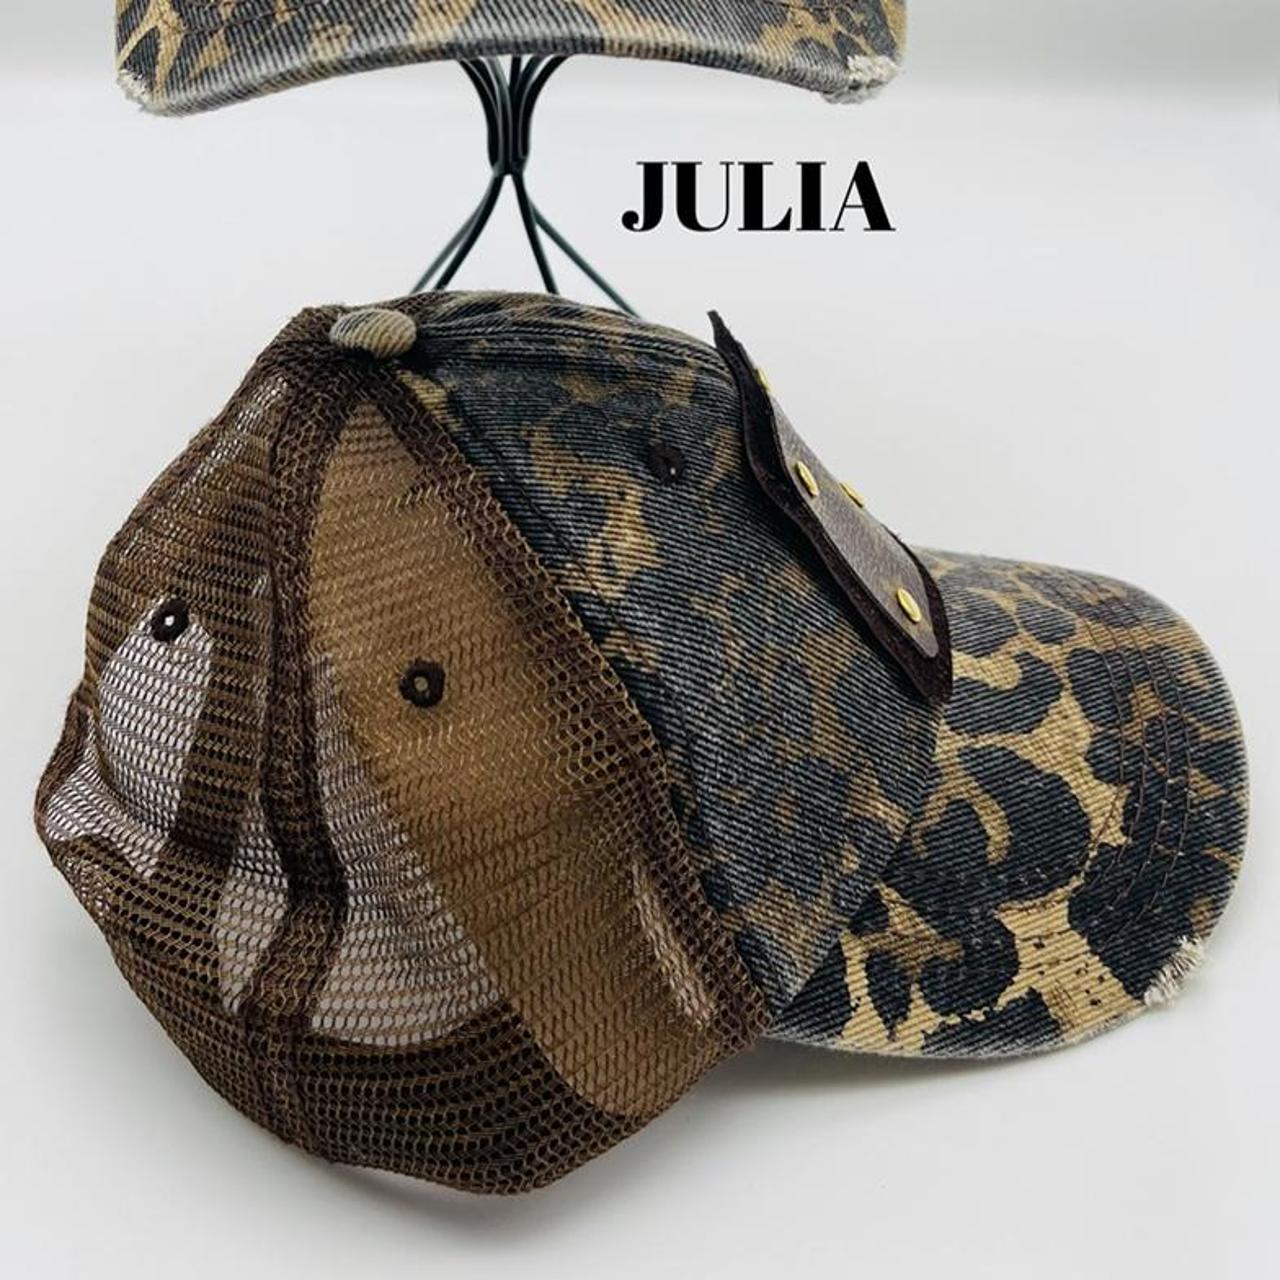 Upcycled Louis Vuitton bucket hat. The authentic - Depop